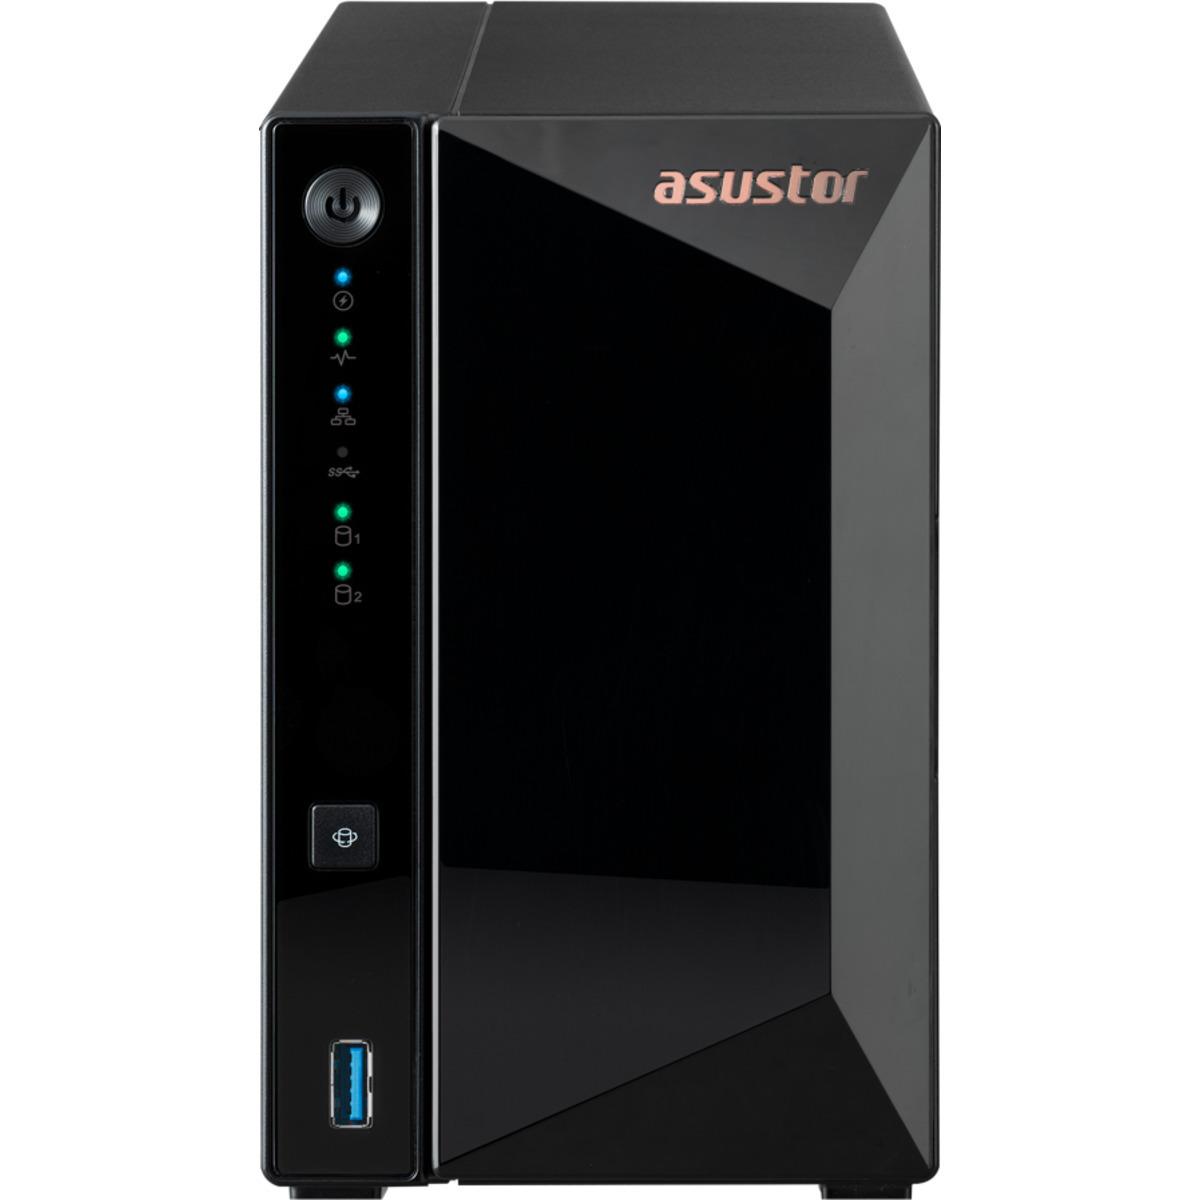 ASUSTOR AS3302T NAS - Network Attached Storage Device Burn-In Tested Configurations